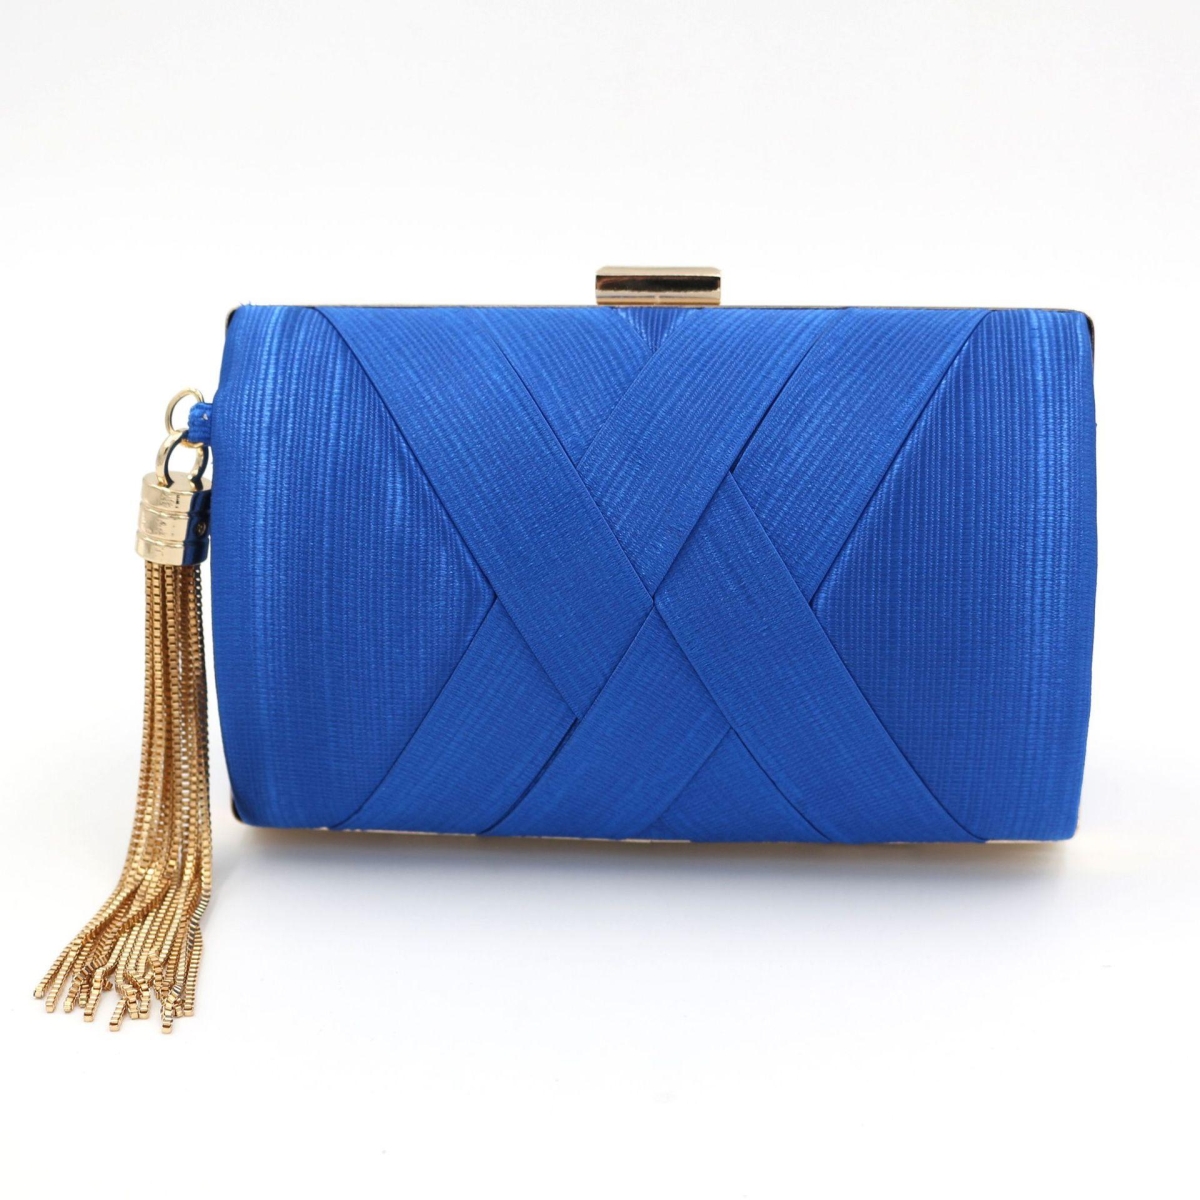 Buy Closeout Brand River Royal Blue Genuine Crocodile Leather Clutch Bag |  Clutches for Women | Leather Handbag | Clutch Purse at ShopLC.